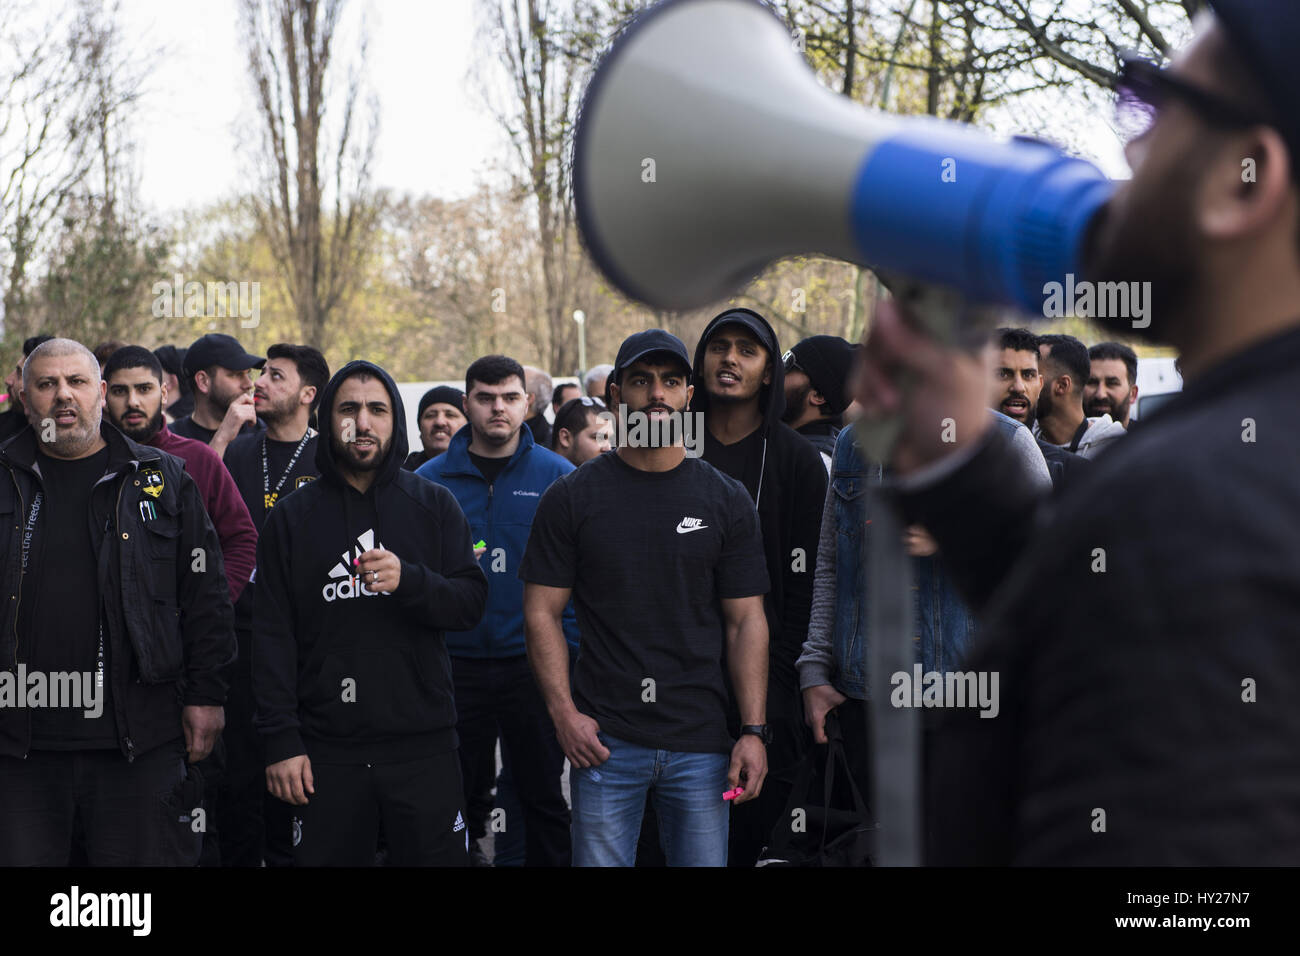 Berlin, Berlin, Germany. 31st Mar, 2017. Employees of the security company Fulltime Service GmbH demonstrate in front of the Landesamt fÃ¼r FlÃ¼chtlingsangelegenheiten (LAF) for the payment of wage arrears from 3 months. The employees are, among others objects, responsible for security in refugee accommodation in Berlin. [German: BeschÃ¤ftigte des Sicherheitsunternehmens Full Time Service GmbH demonstrieren vor dem Landesamt fÃ¼r FlÃ¼chtlingsangelegenheiten (LAF) fÃ¼r die Auszahlung von LohnrÃ¼ckstÃ¤nden aus 3 Monaten. Die BeschÃ¤ftigten sind fÃ¼r die Sicherheit unter anderem an Berliner FlÃ Stock Photo